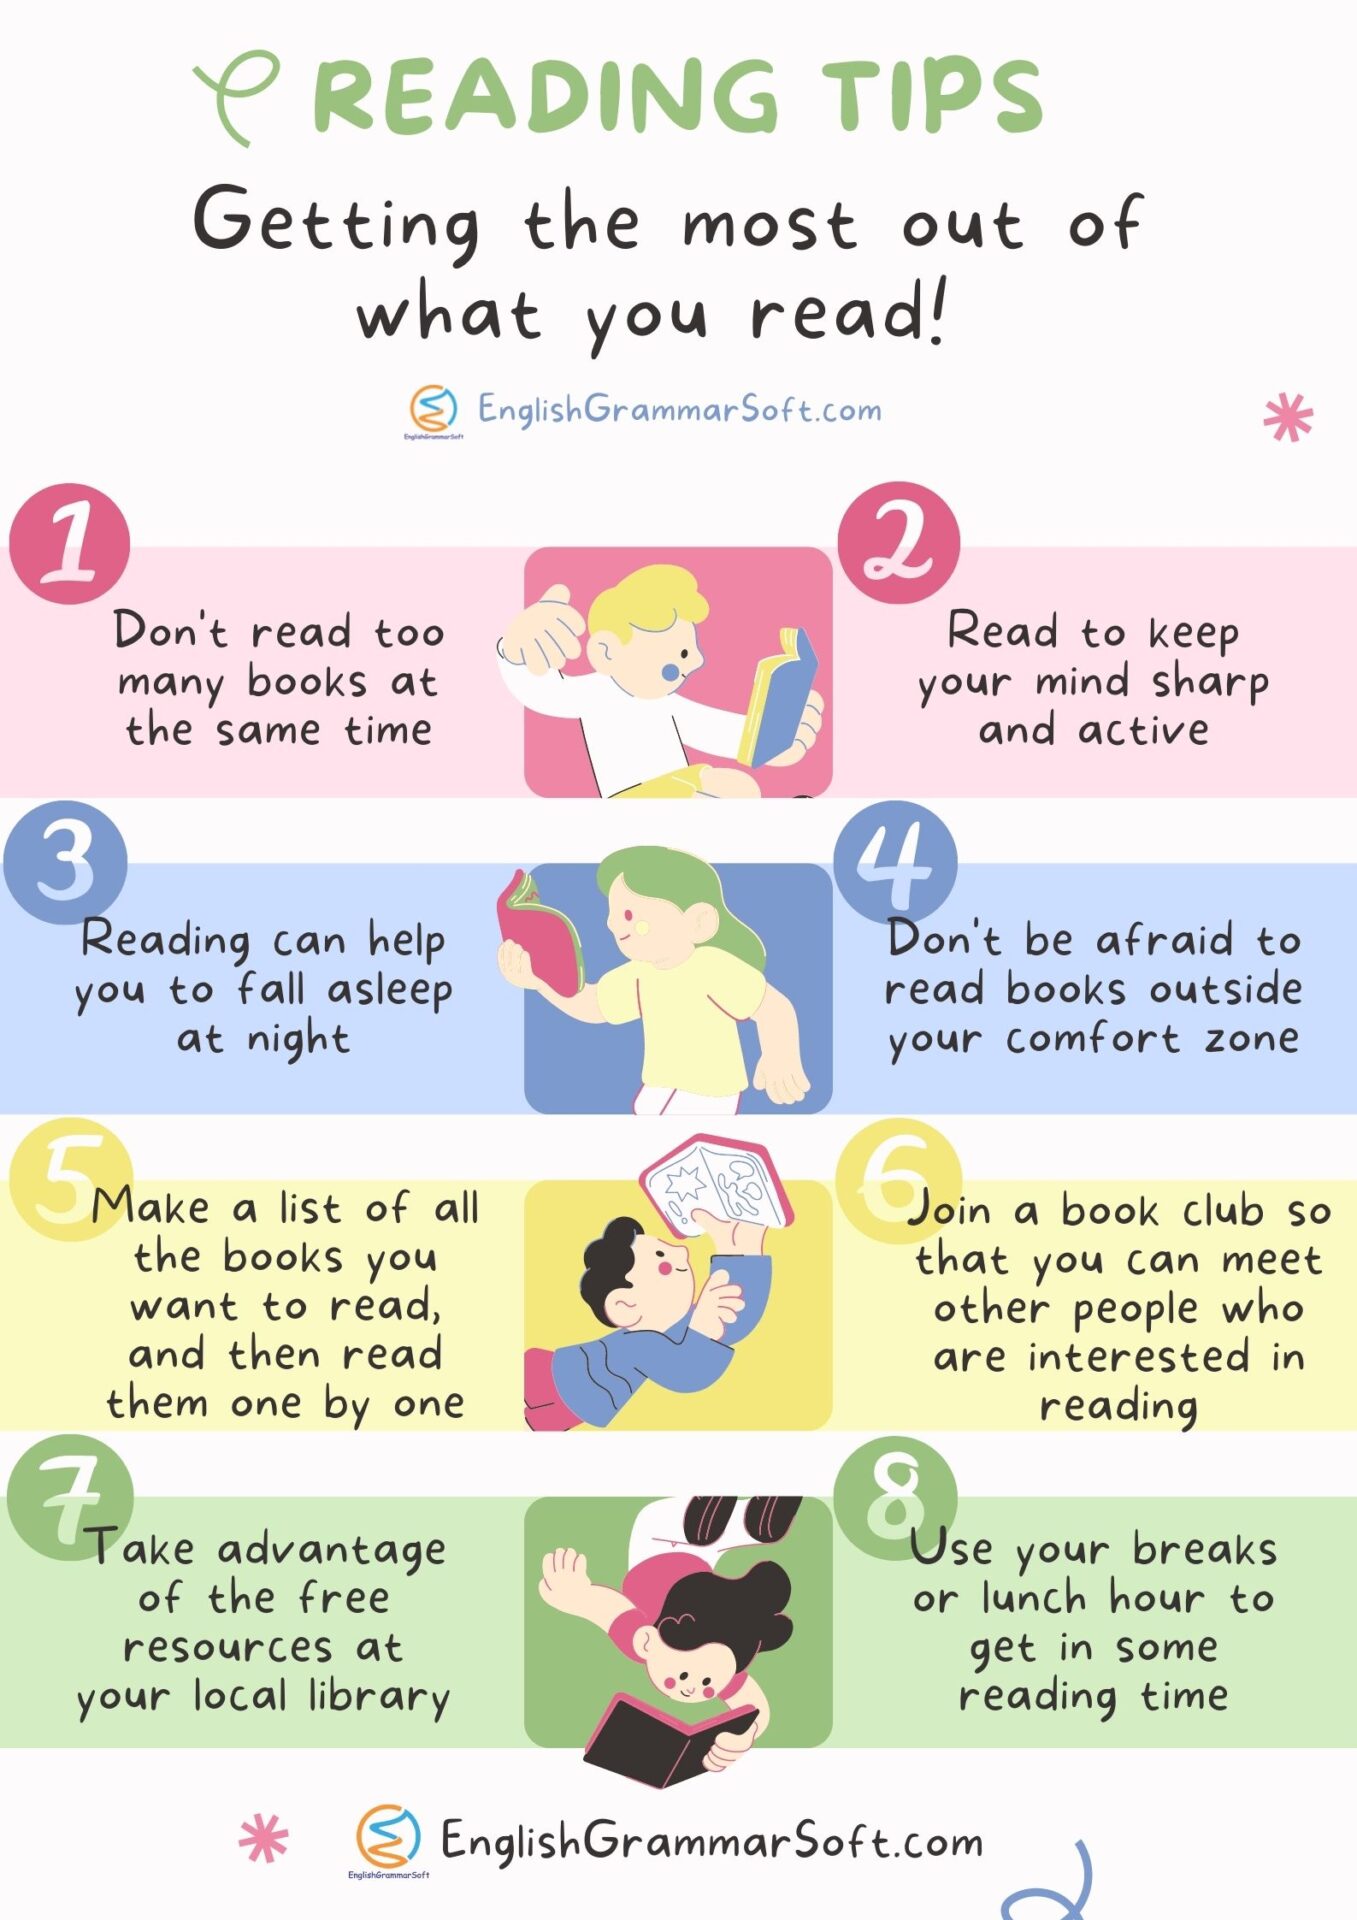 Reading Tips Getting The Most Out of What You Read